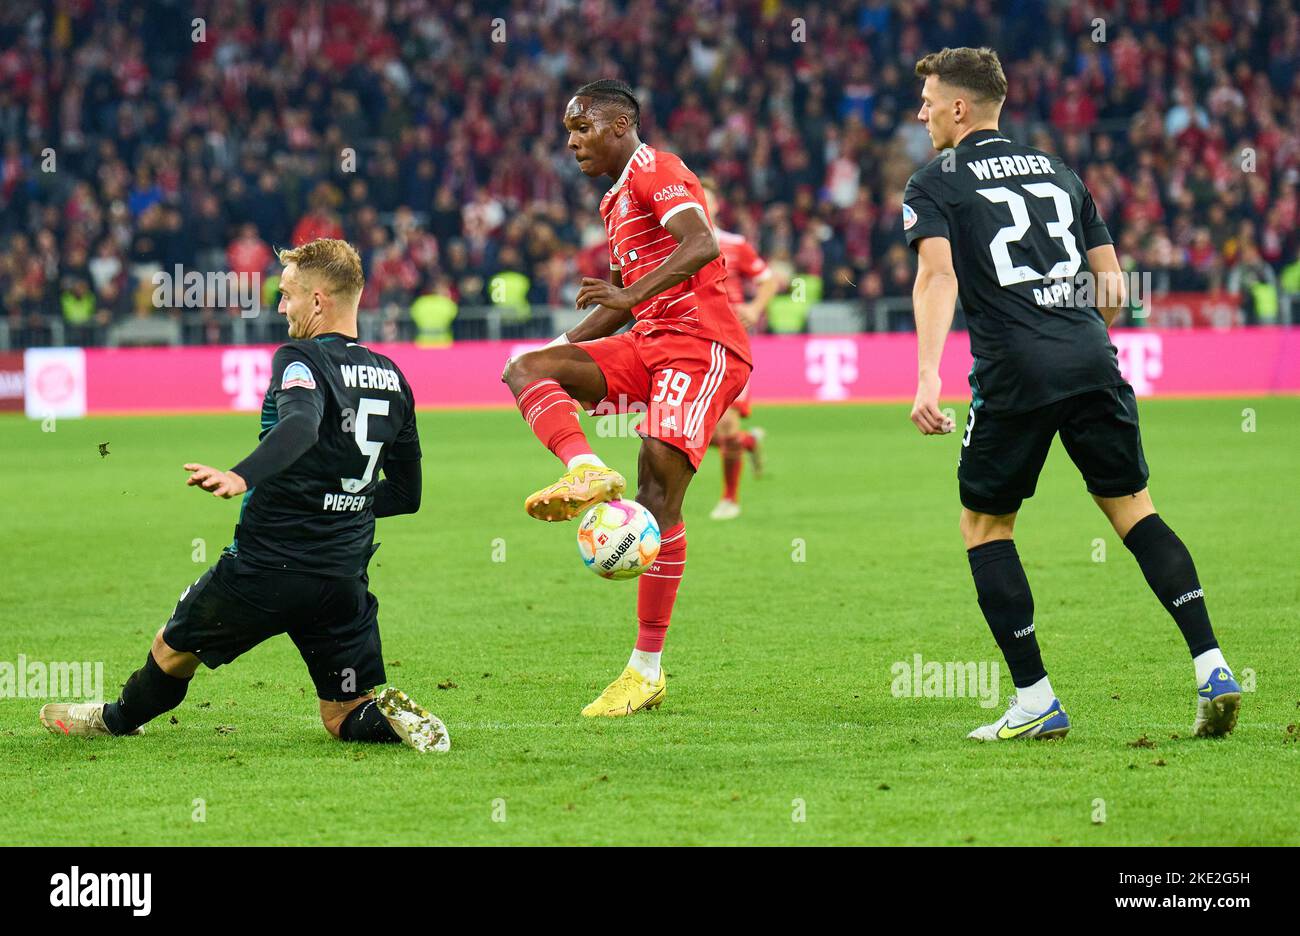 Mathys Tel, FCB 39   compete for the ball, tackling, duel, header, zweikampf, action, fight against Amos Pieper, BRE 5 Nicolai Rapp, BRE 23  in the match FC BAYERN MÜNCHEN - SV WERDER BREMEN 6-1 1.German Football League on Nov 8, 2022 in Munich, Germany. Season 2022/2023, matchday 14, 1.Bundesliga, FCB, München, 14.Spieltag © Peter Schatz / Alamy Live News    - DFL REGULATIONS PROHIBIT ANY USE OF PHOTOGRAPHS as IMAGE SEQUENCES and/or QUASI-VIDEO - Stock Photo